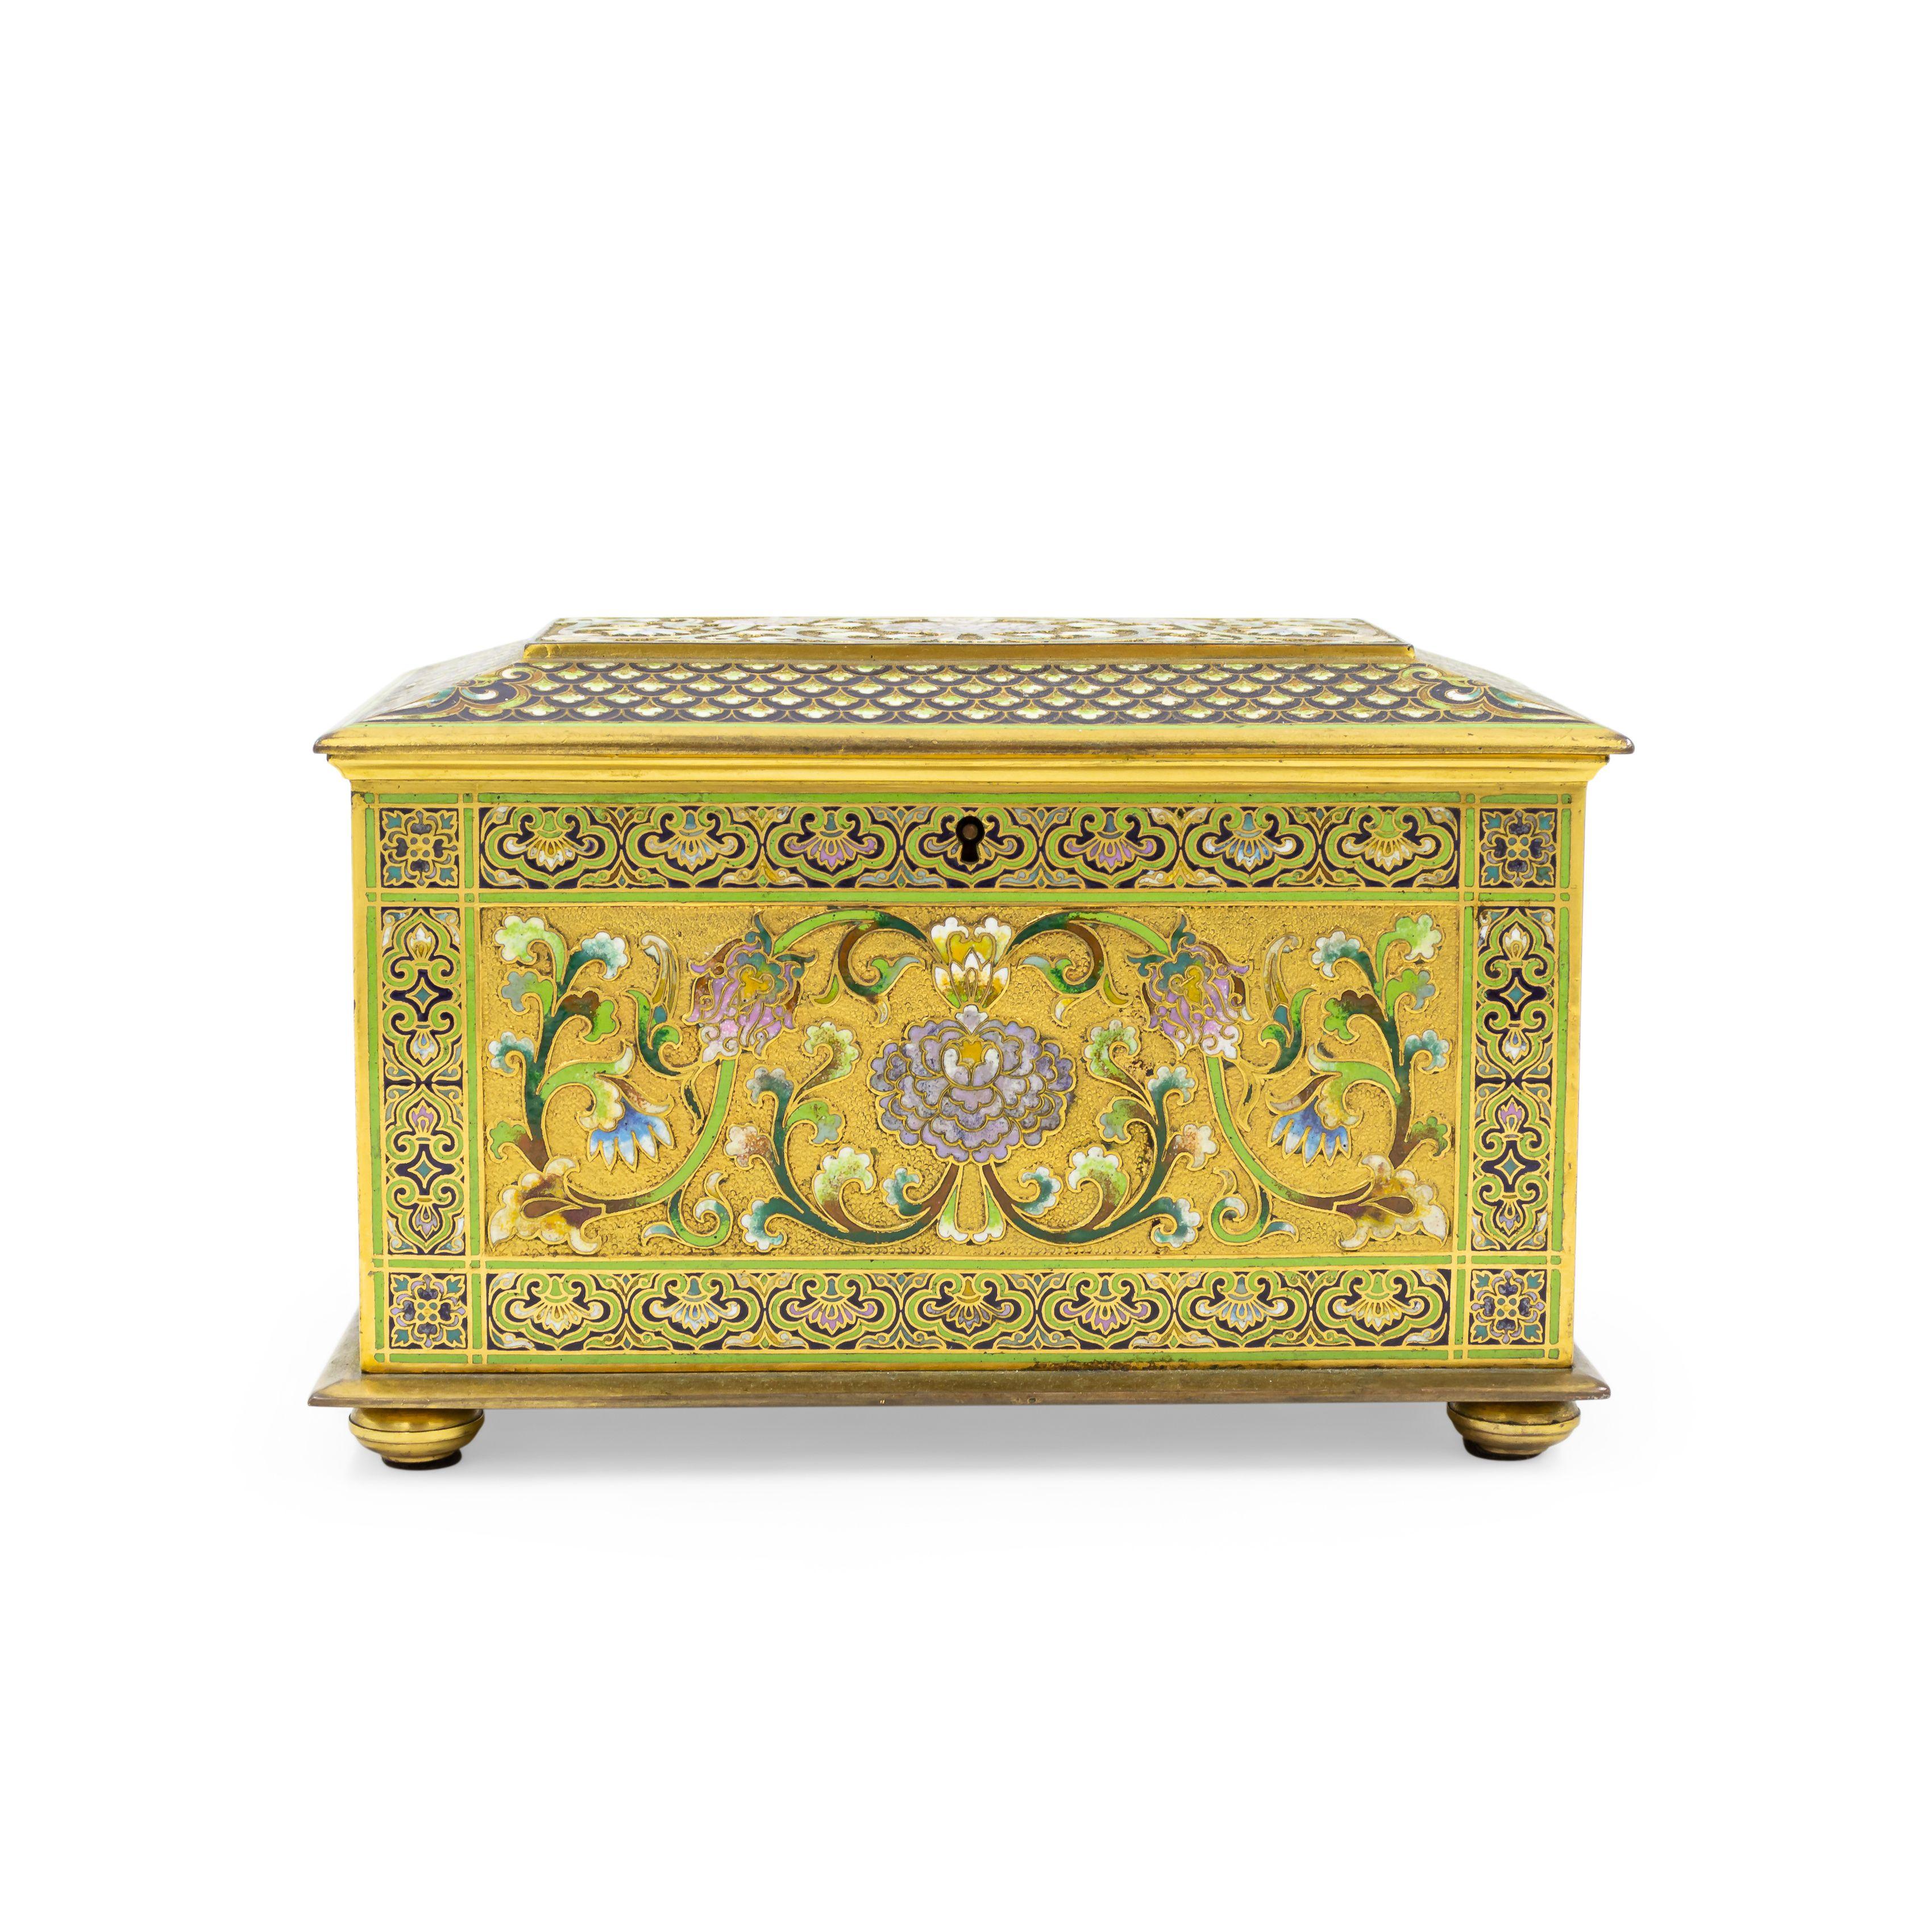 French Victorian bronze and multicolored enamel cloisonne box with floral and scroll design with red velvet interior.
     